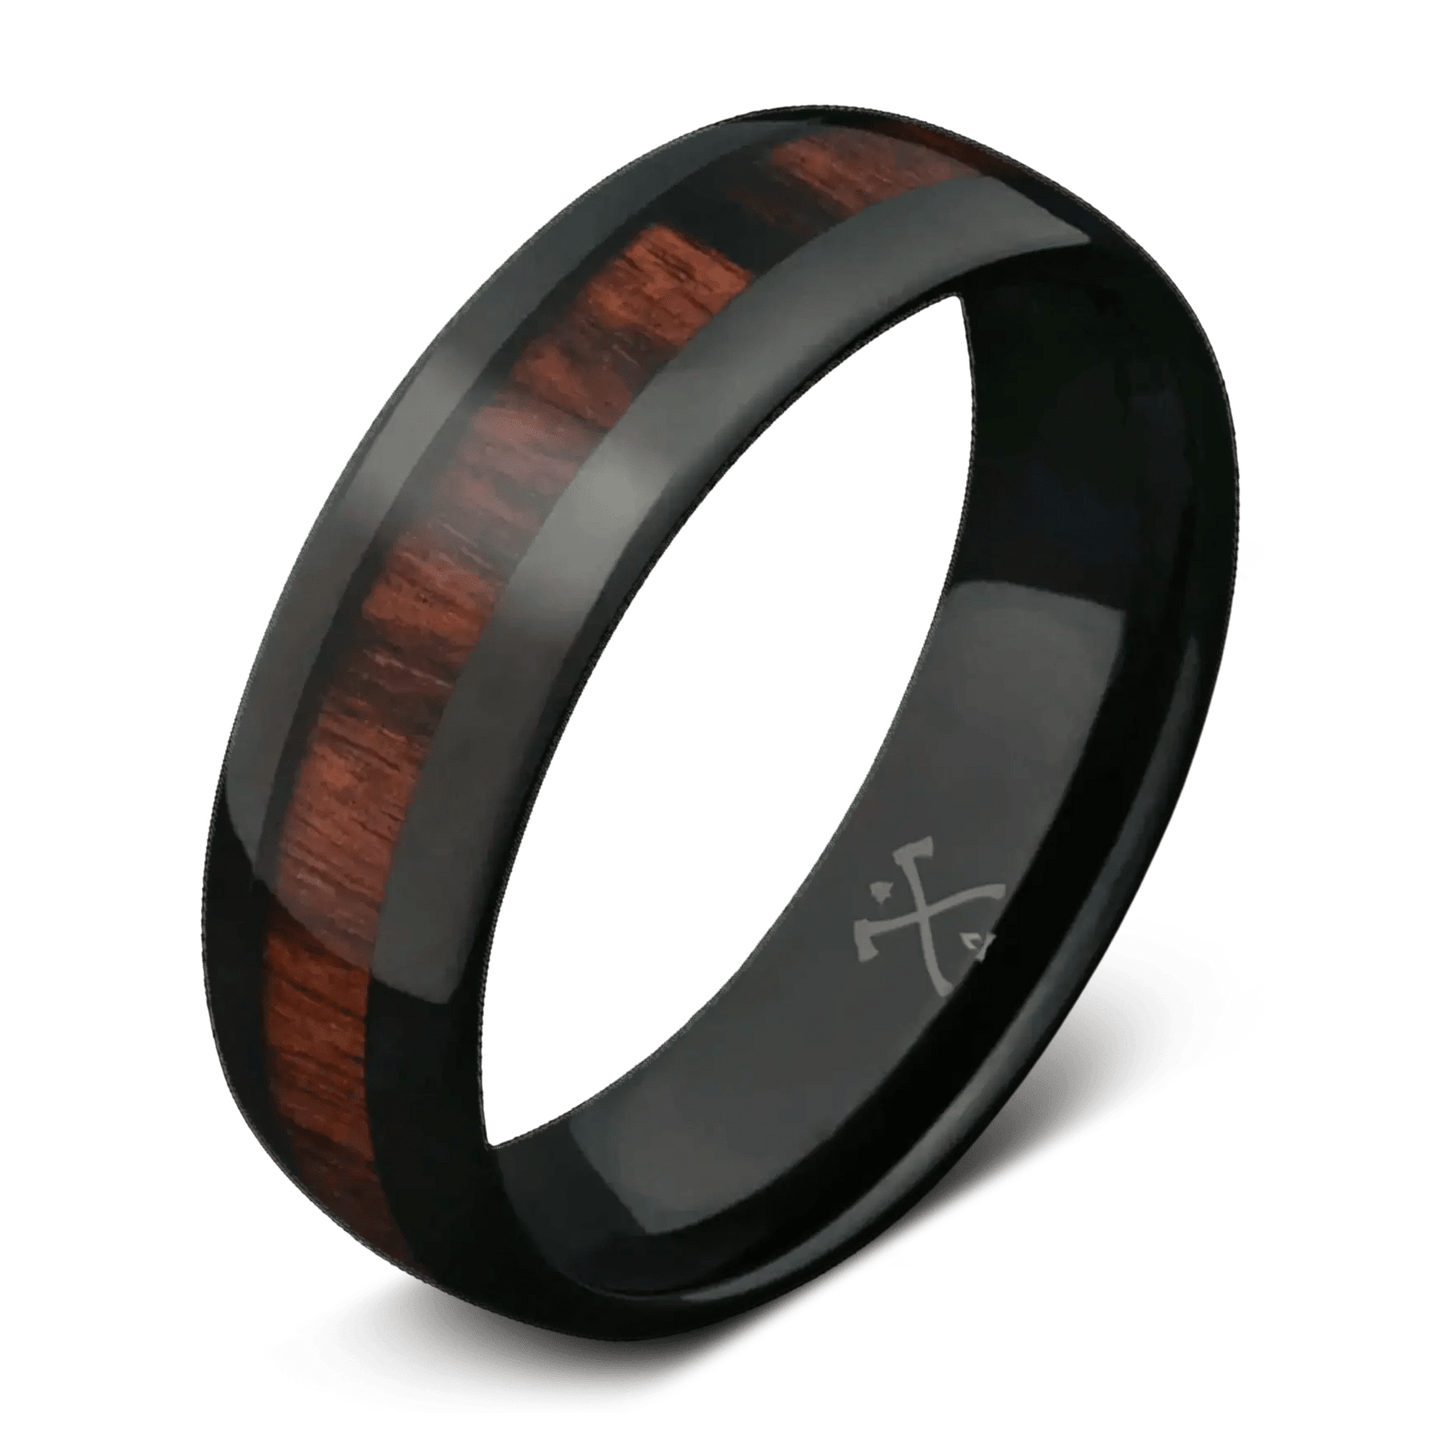 The Cowboy - Black plated tungsten and koa wood - mens wedding bands